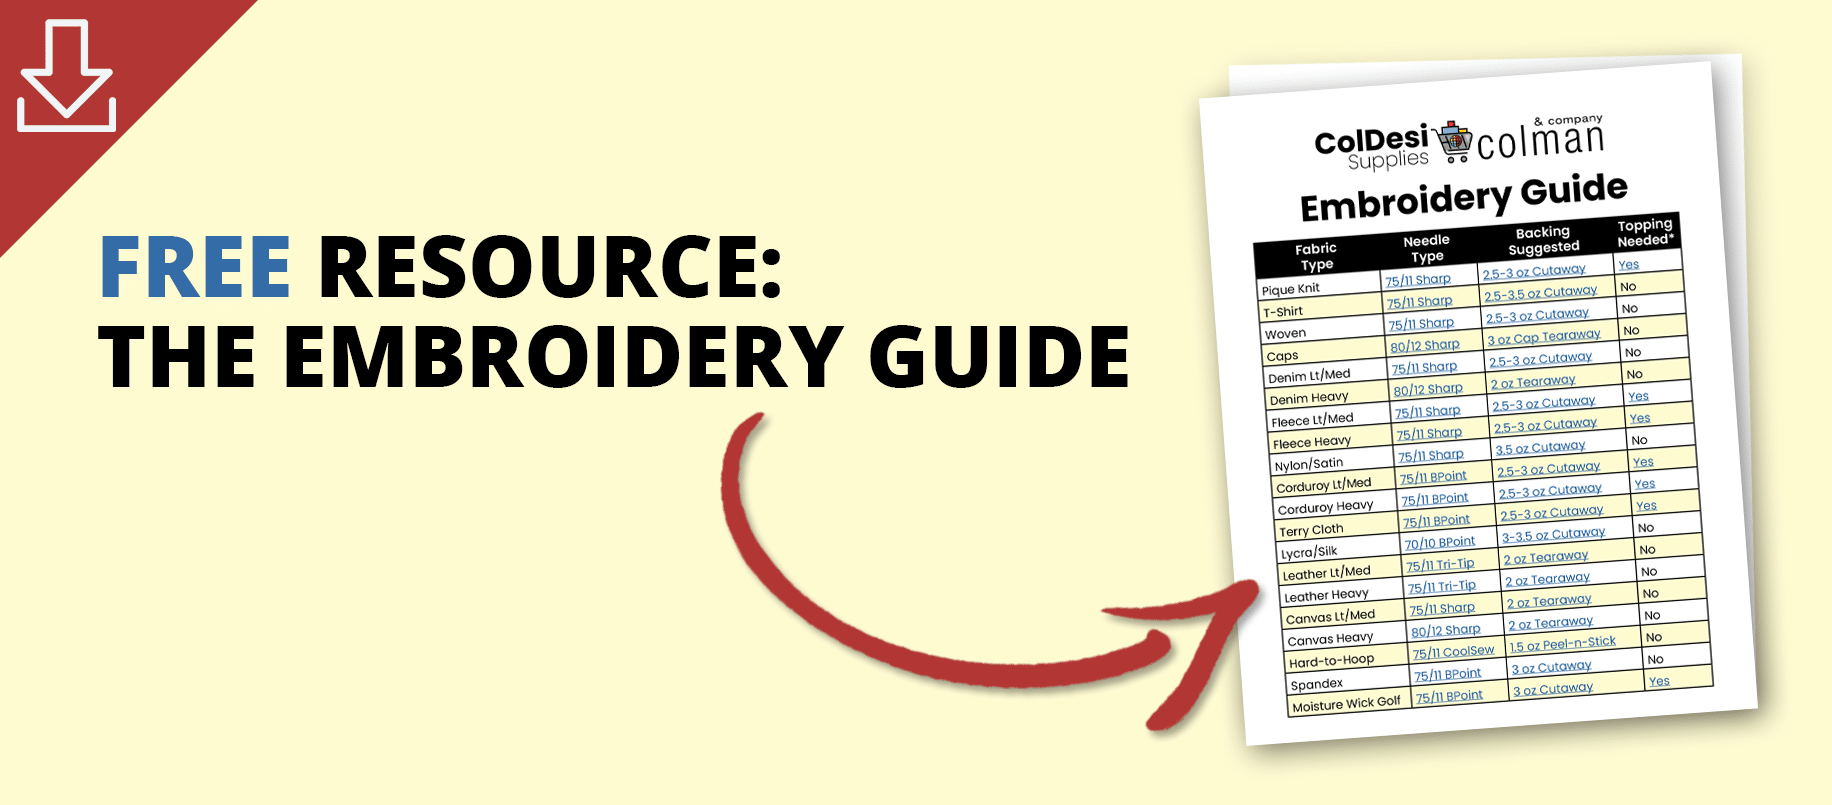 Guide - Article 3